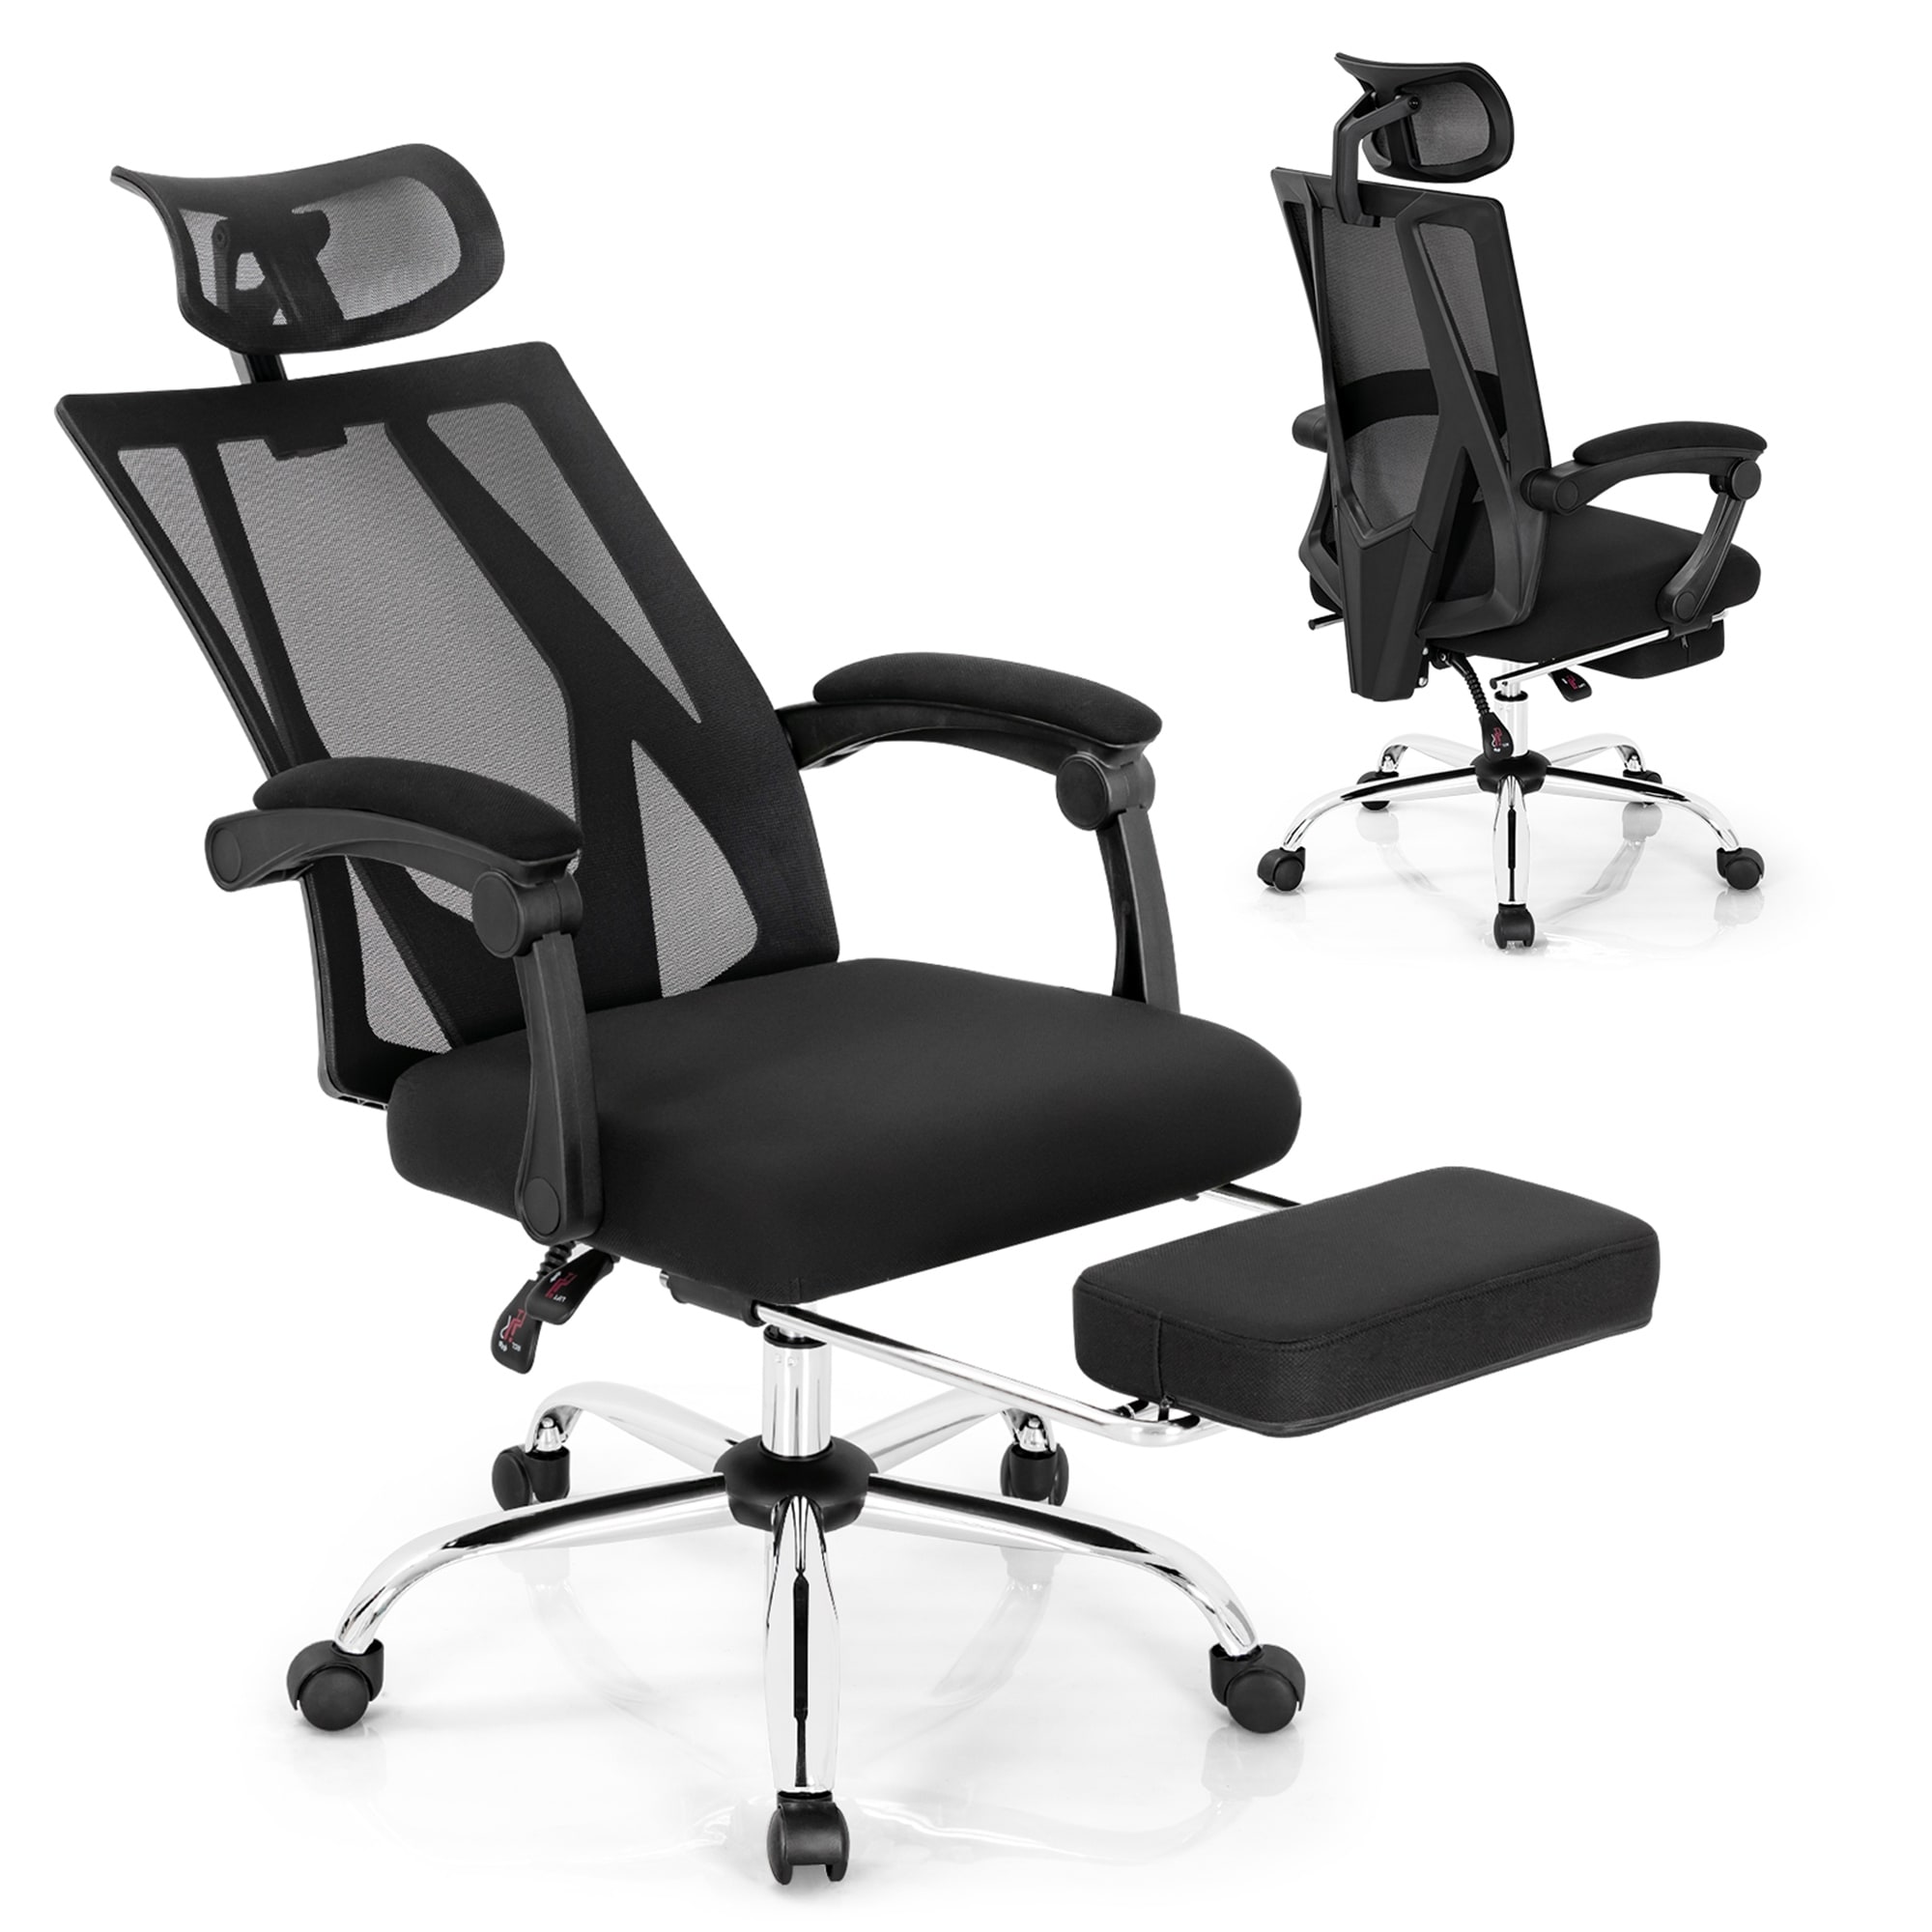 https://ak1.ostkcdn.com/images/products/is/images/direct/943558d2ae4b4eb6803a49fb69af77f3135e5735/Gymax-High-Back-Office-Chair-Mesh-Reclining-Executive-Chair-w-.jpg